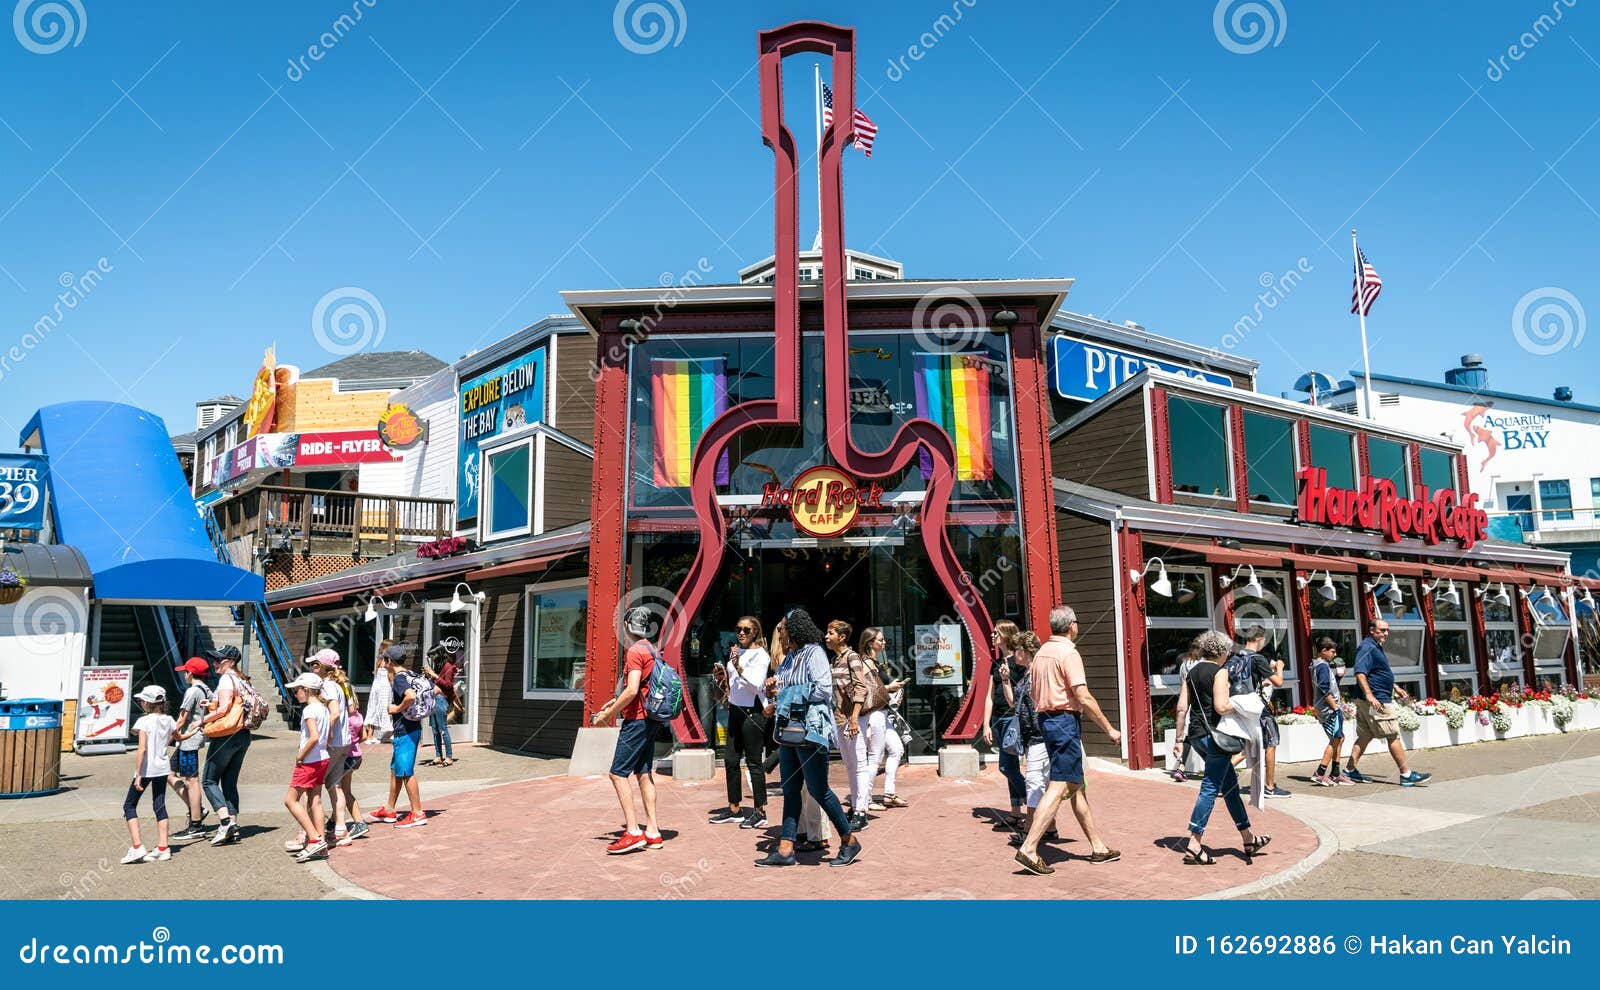 Hard Rock Cafe In Fisherman S Wharf San Francisco California United States Of America Editorial Photo Image Of Music Dock